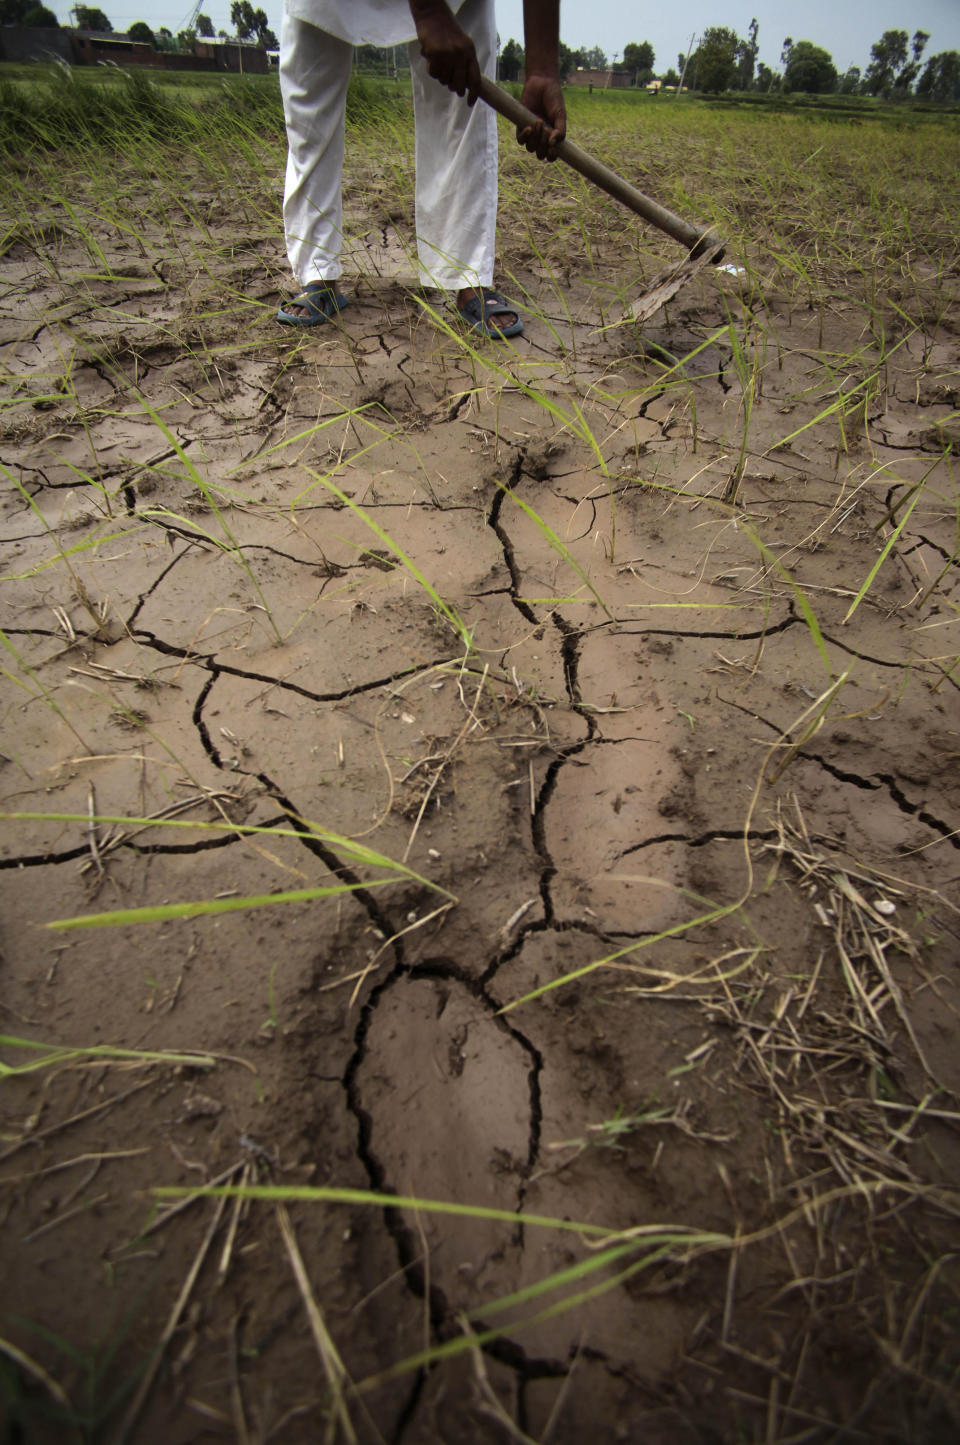 An Indian farmer works on a dry, cracked paddy field in Ranbir Singh Pura 34 kilometers (21 miles) from Jammu, India, Friday, Aug. 3, 2012. India's Meteorological Department says it expects the country to get at least 10 percent less rain this June-to-September monsoon season. The shortfall also is expected to swell electricity demand in a power-starved nation as farmers turn to irrigation pumps to keep their fields watered. (AP Photo/Channi Anand)